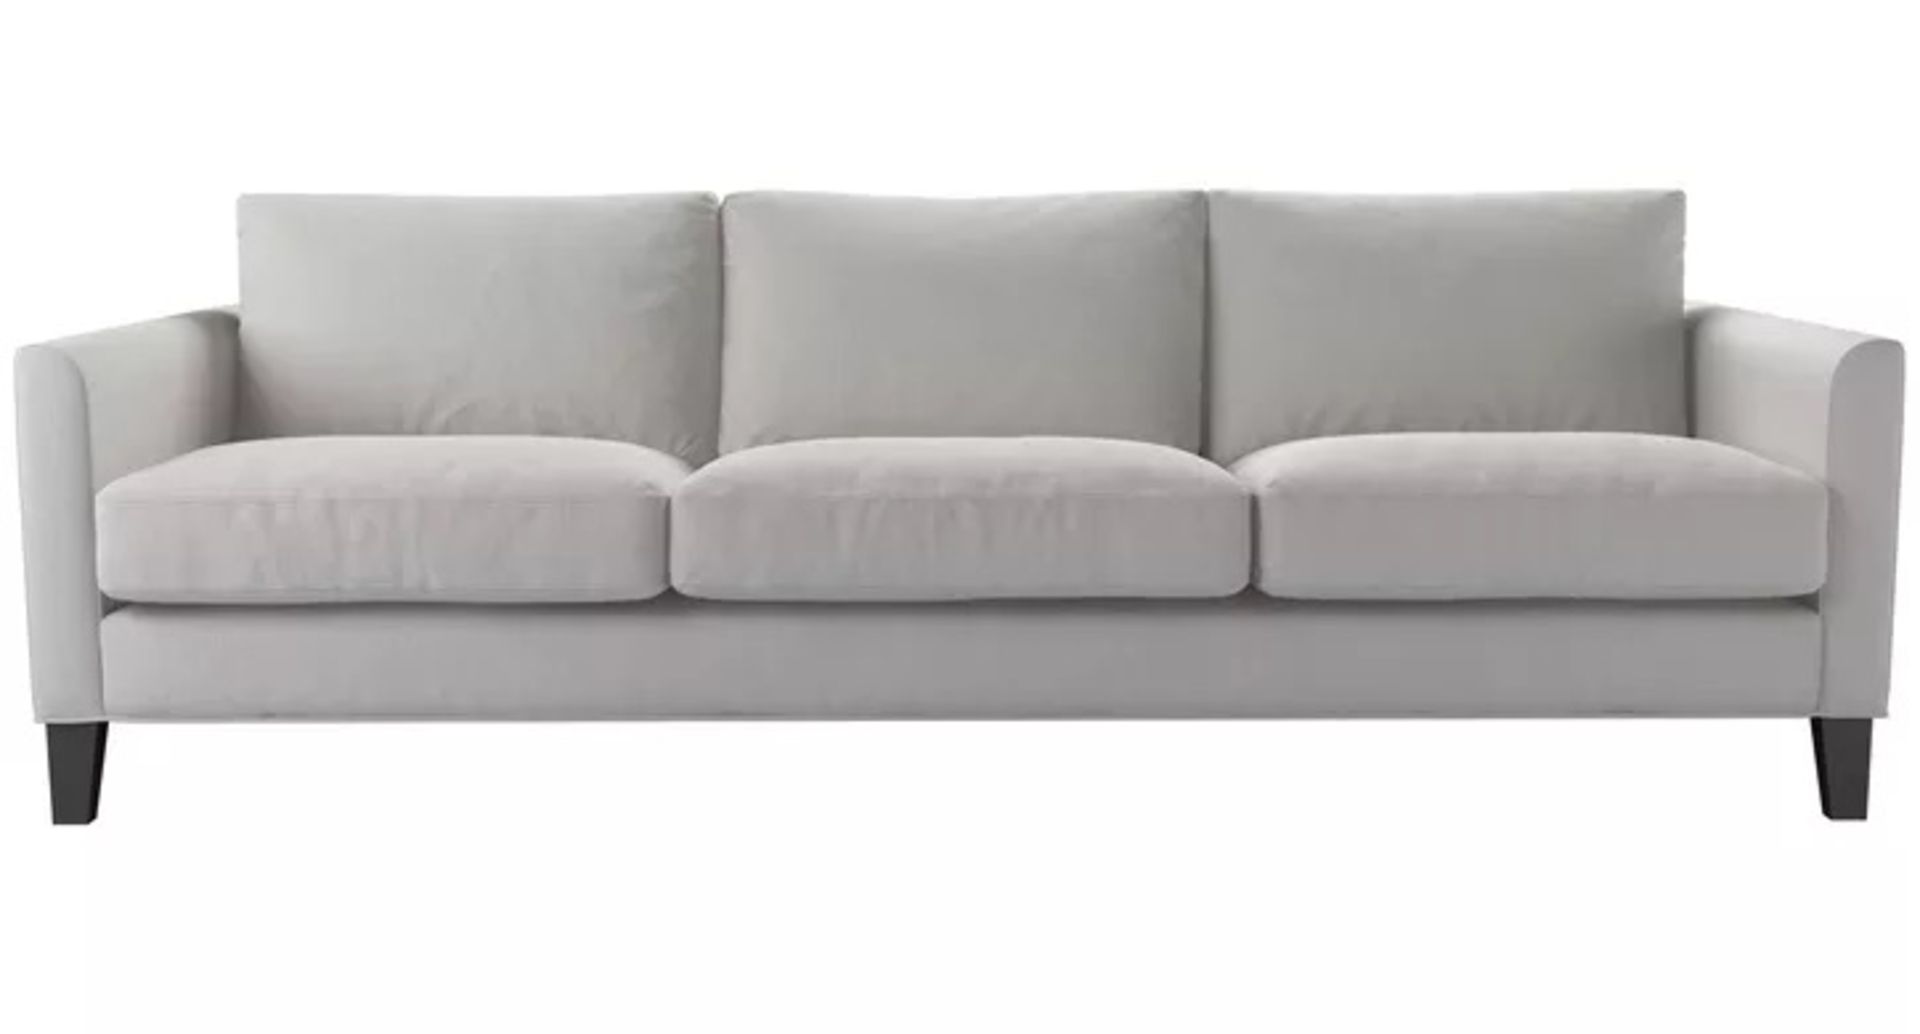 Izzy 4 Seat Sofa In Alabaster Brushed Linen Cotton RRP - £2630